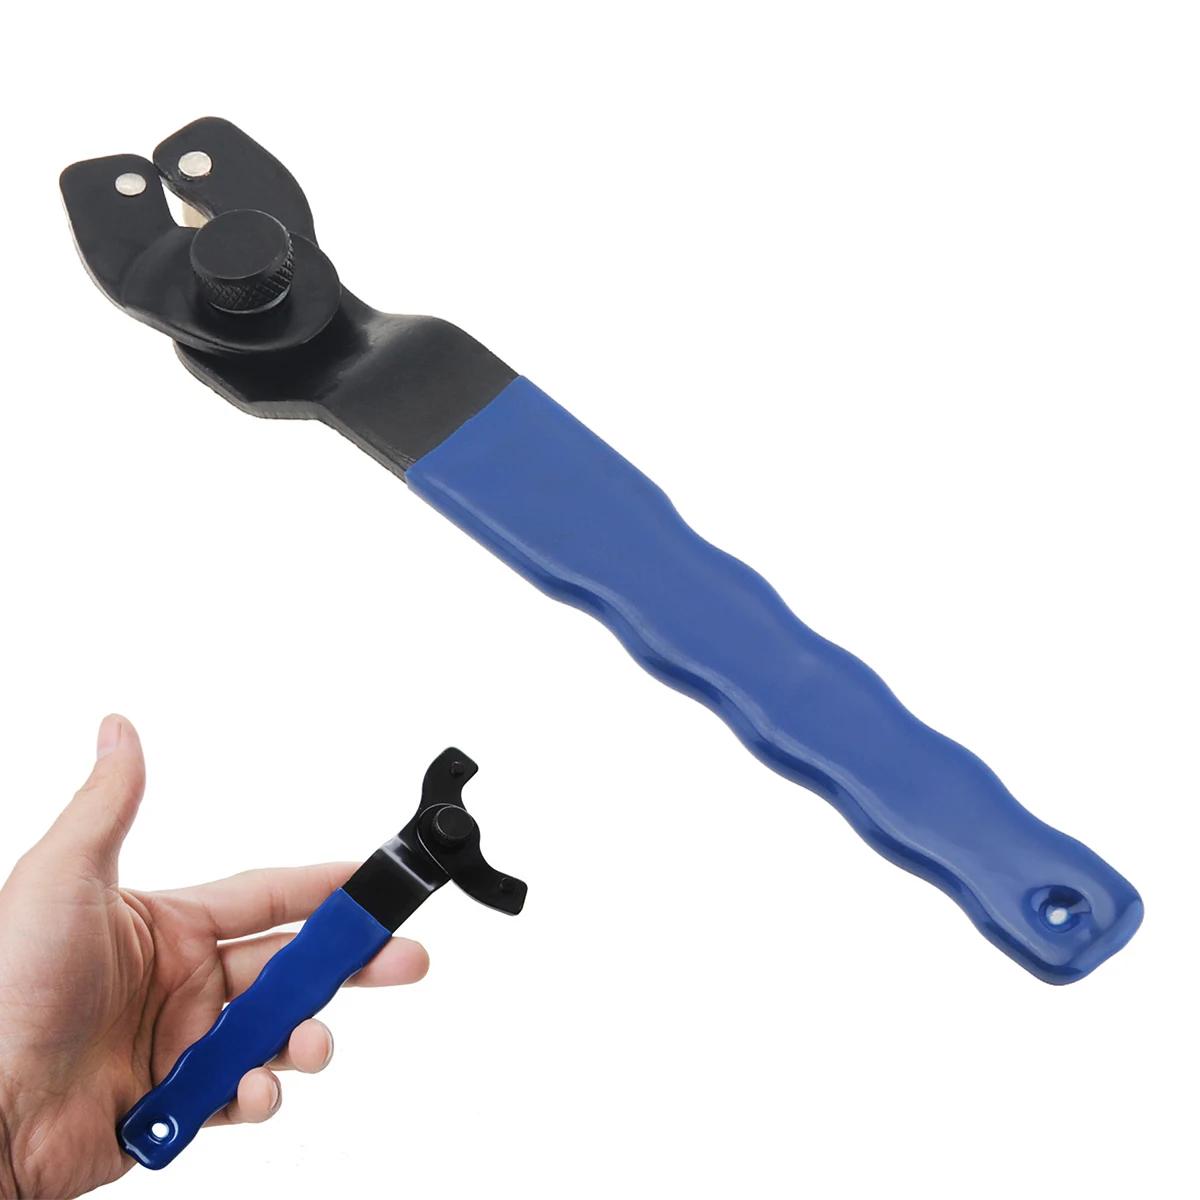 Angle Grinder Wrench Universal Power Tool Accessories 10 - 45mm Clamping Adjustable Spanner Home Wrenches Repair Han